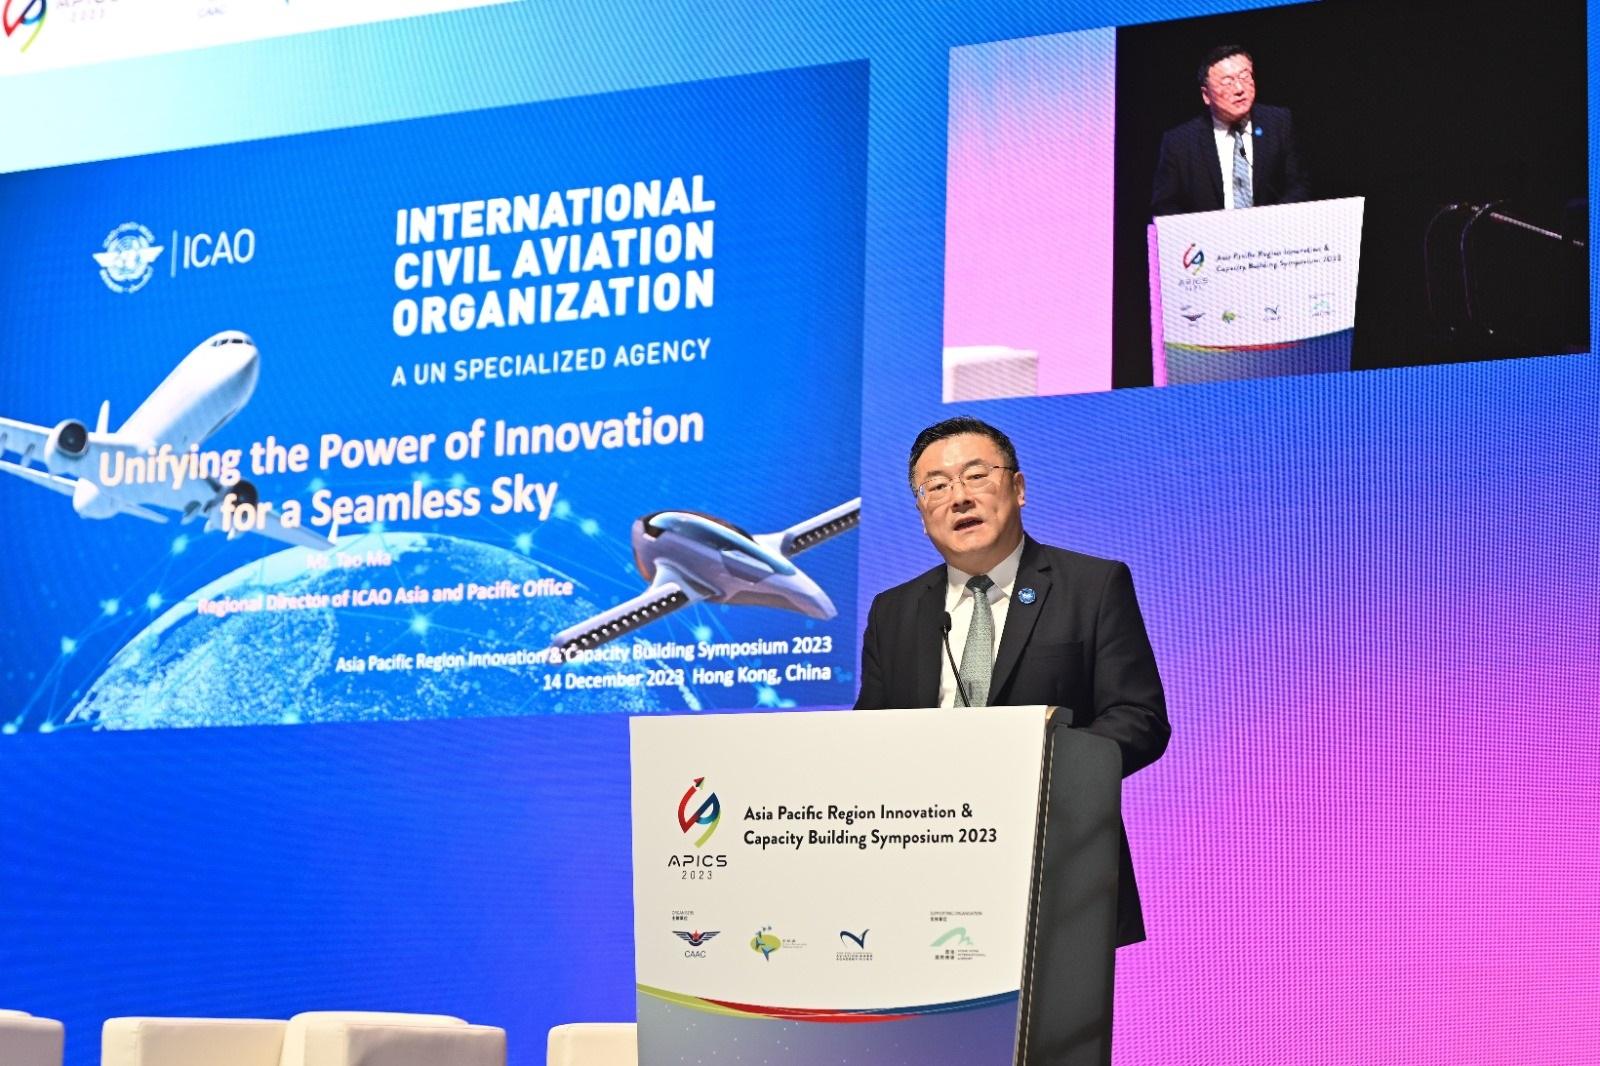 The International Civil Aviation Organization Asia Pacific Regional Director, Mr Ma Tao, delivered a keynote speech at the Asia Pacific Region Innovation & Capacity Building Symposium 2023 today (December 14).
